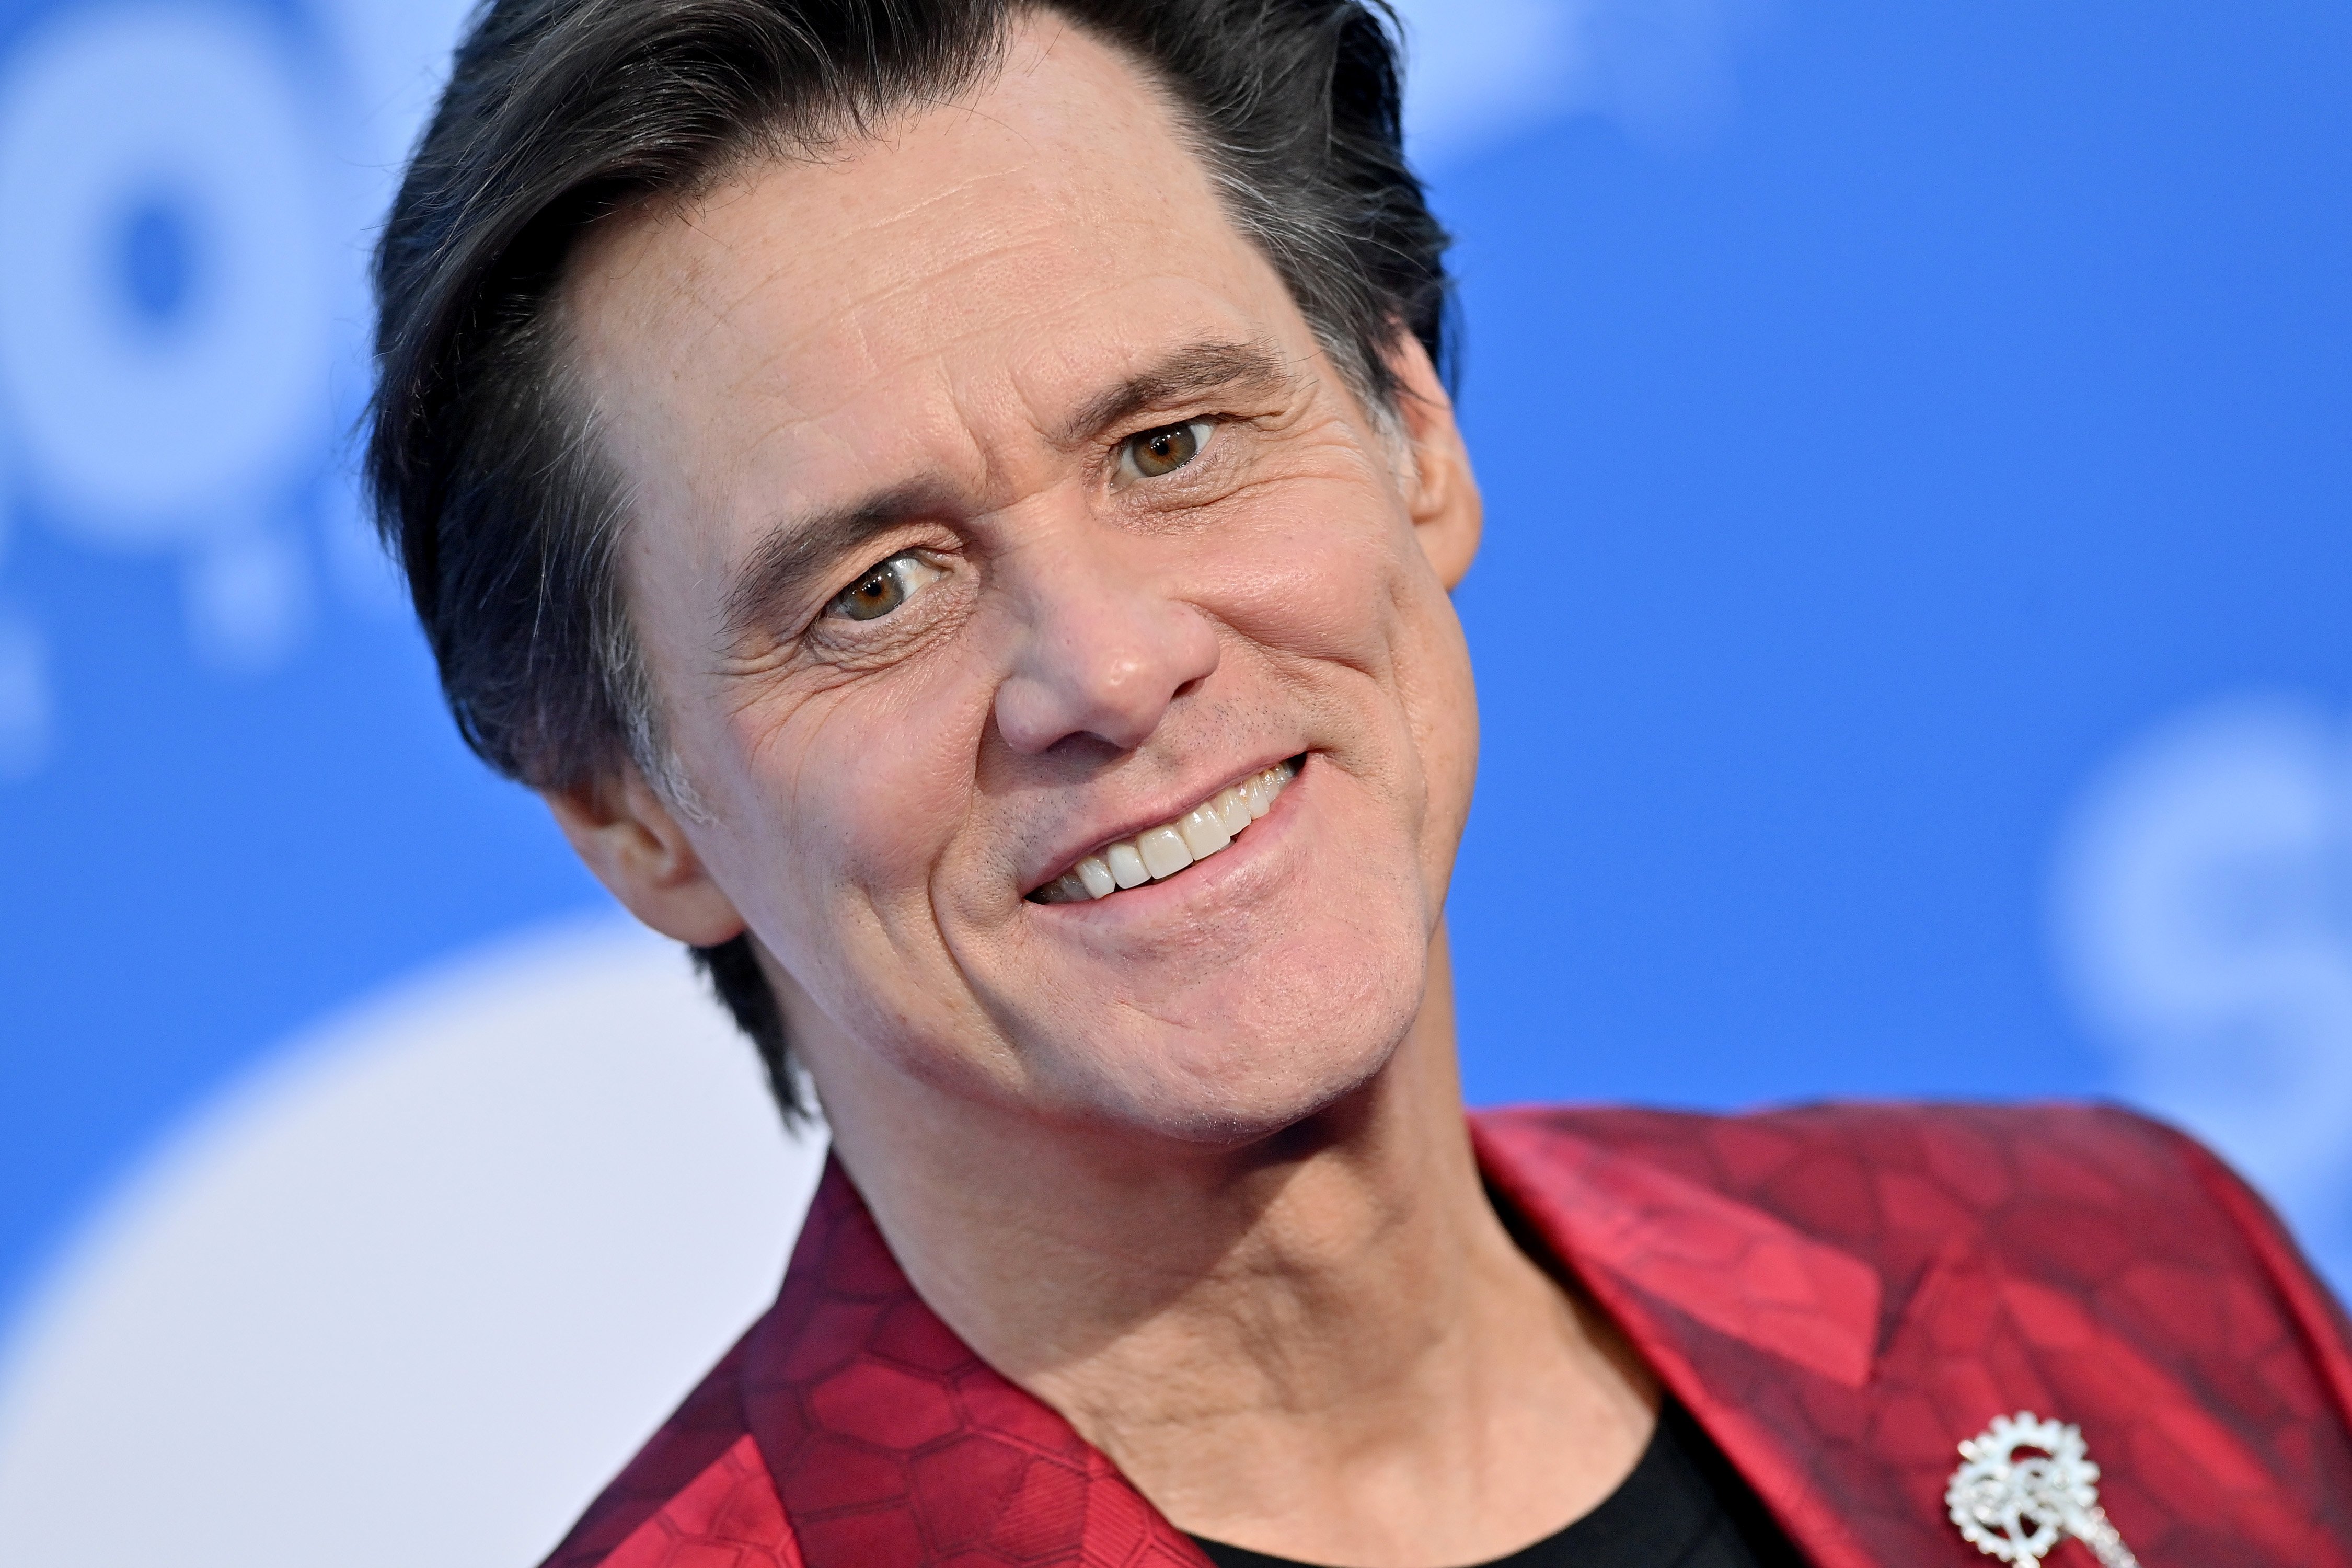 Ace Ventura star Jim Carrey attends the premiere for the movie Sonic the Hedgehog 2